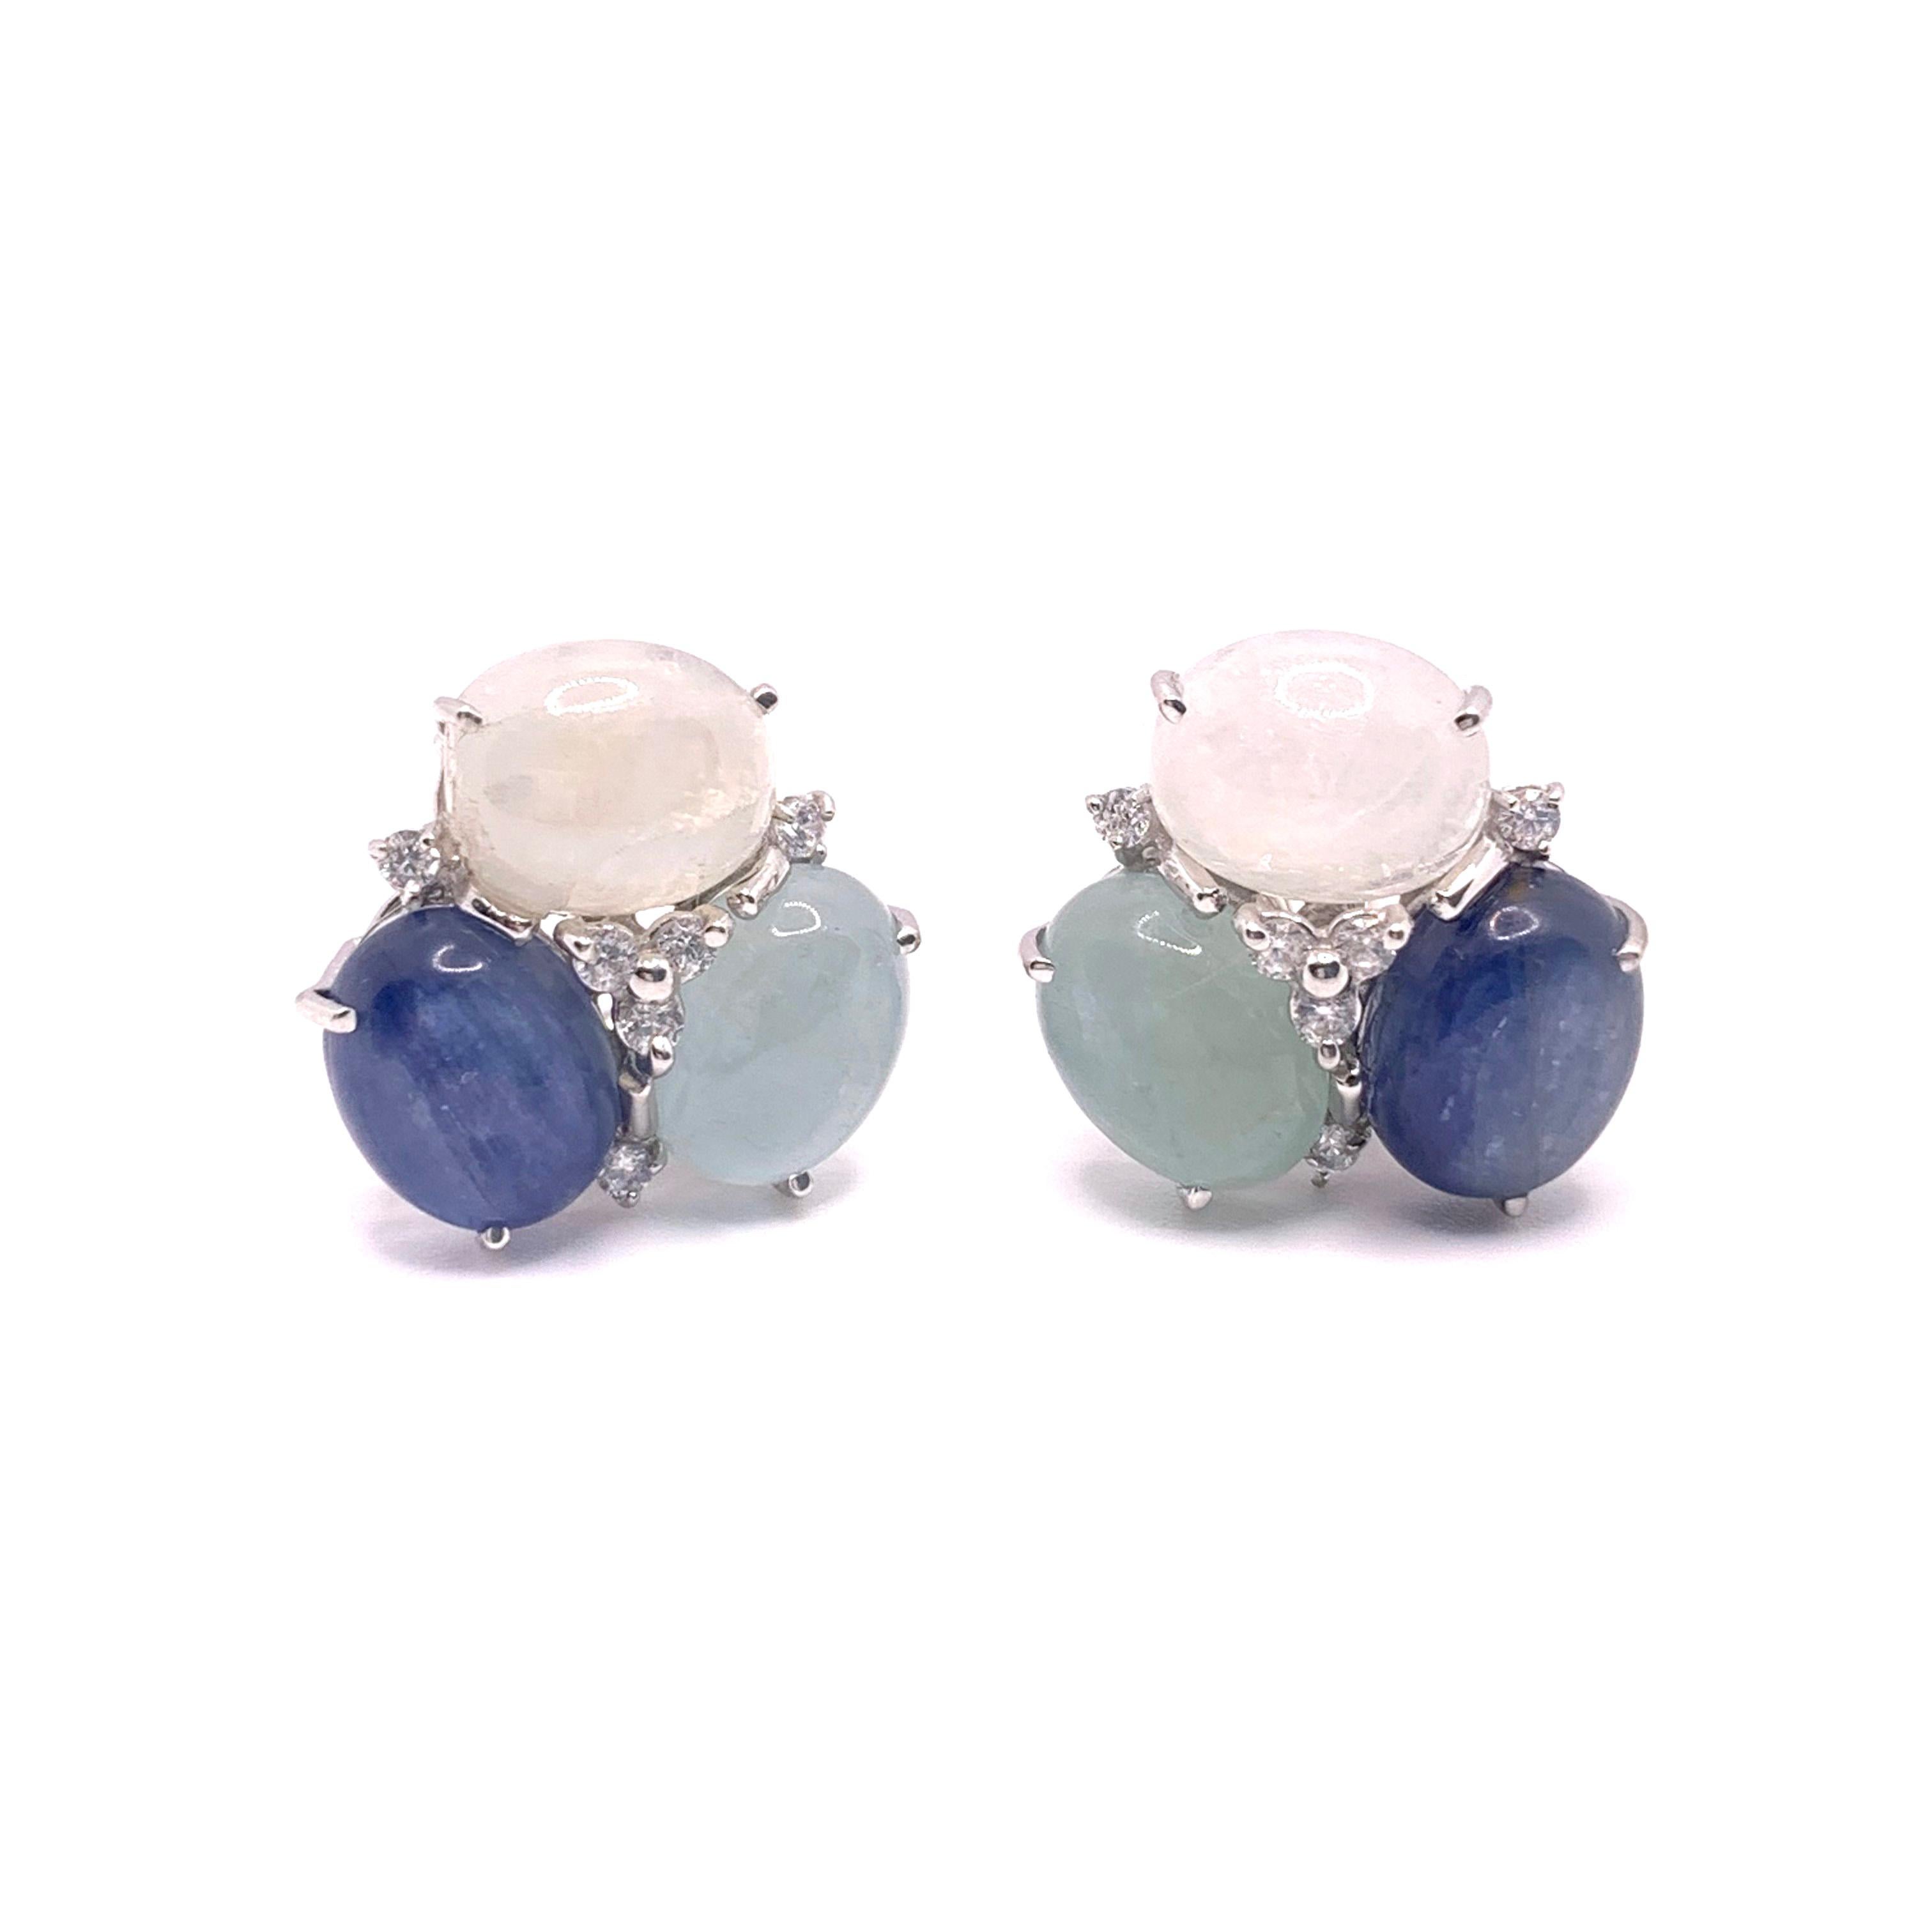 These stunning pair of earrings feature sets of oval cabochon-cut aquamarine, kyanite, and rainbow moonstone, adorned with round simulated diamonds, handset in platinum rhodium plated sterling silver. The combination of these three color stones are